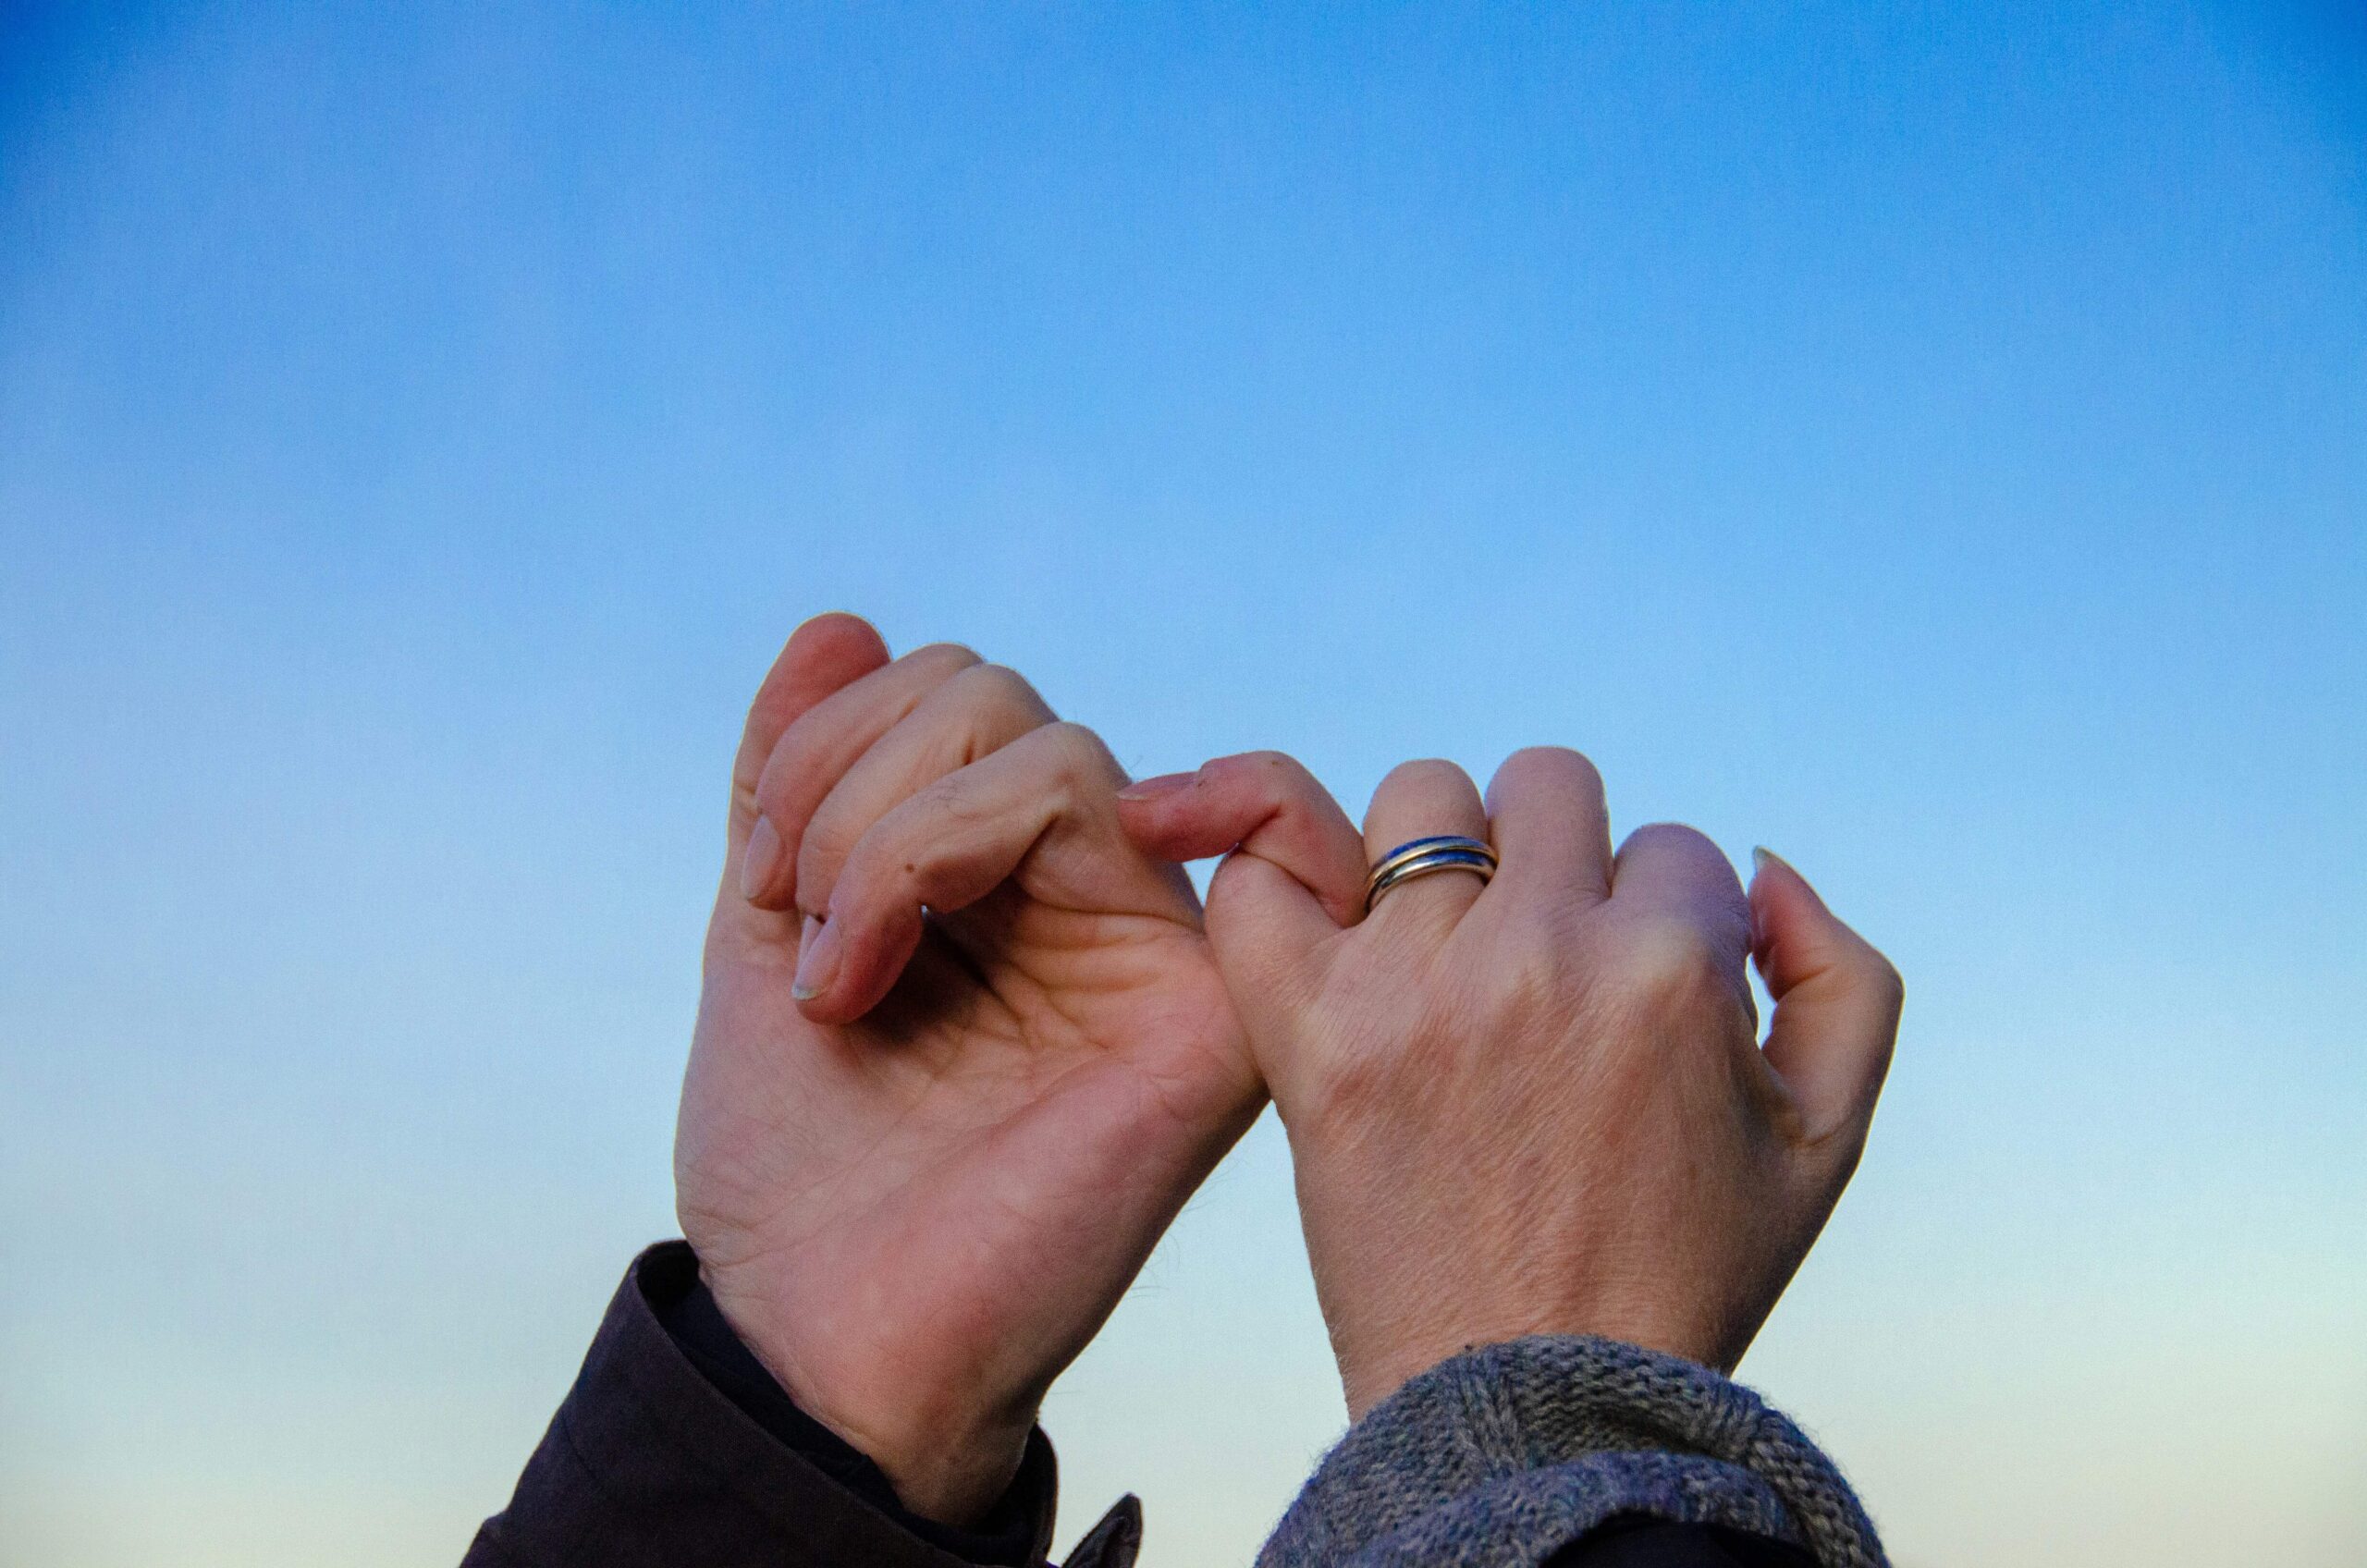 Image of hands holding pinky fingers in front of the blue sky. Work toward rebuilding the trust in your relationship after infidelity with a couples therapist in Miami, FL.